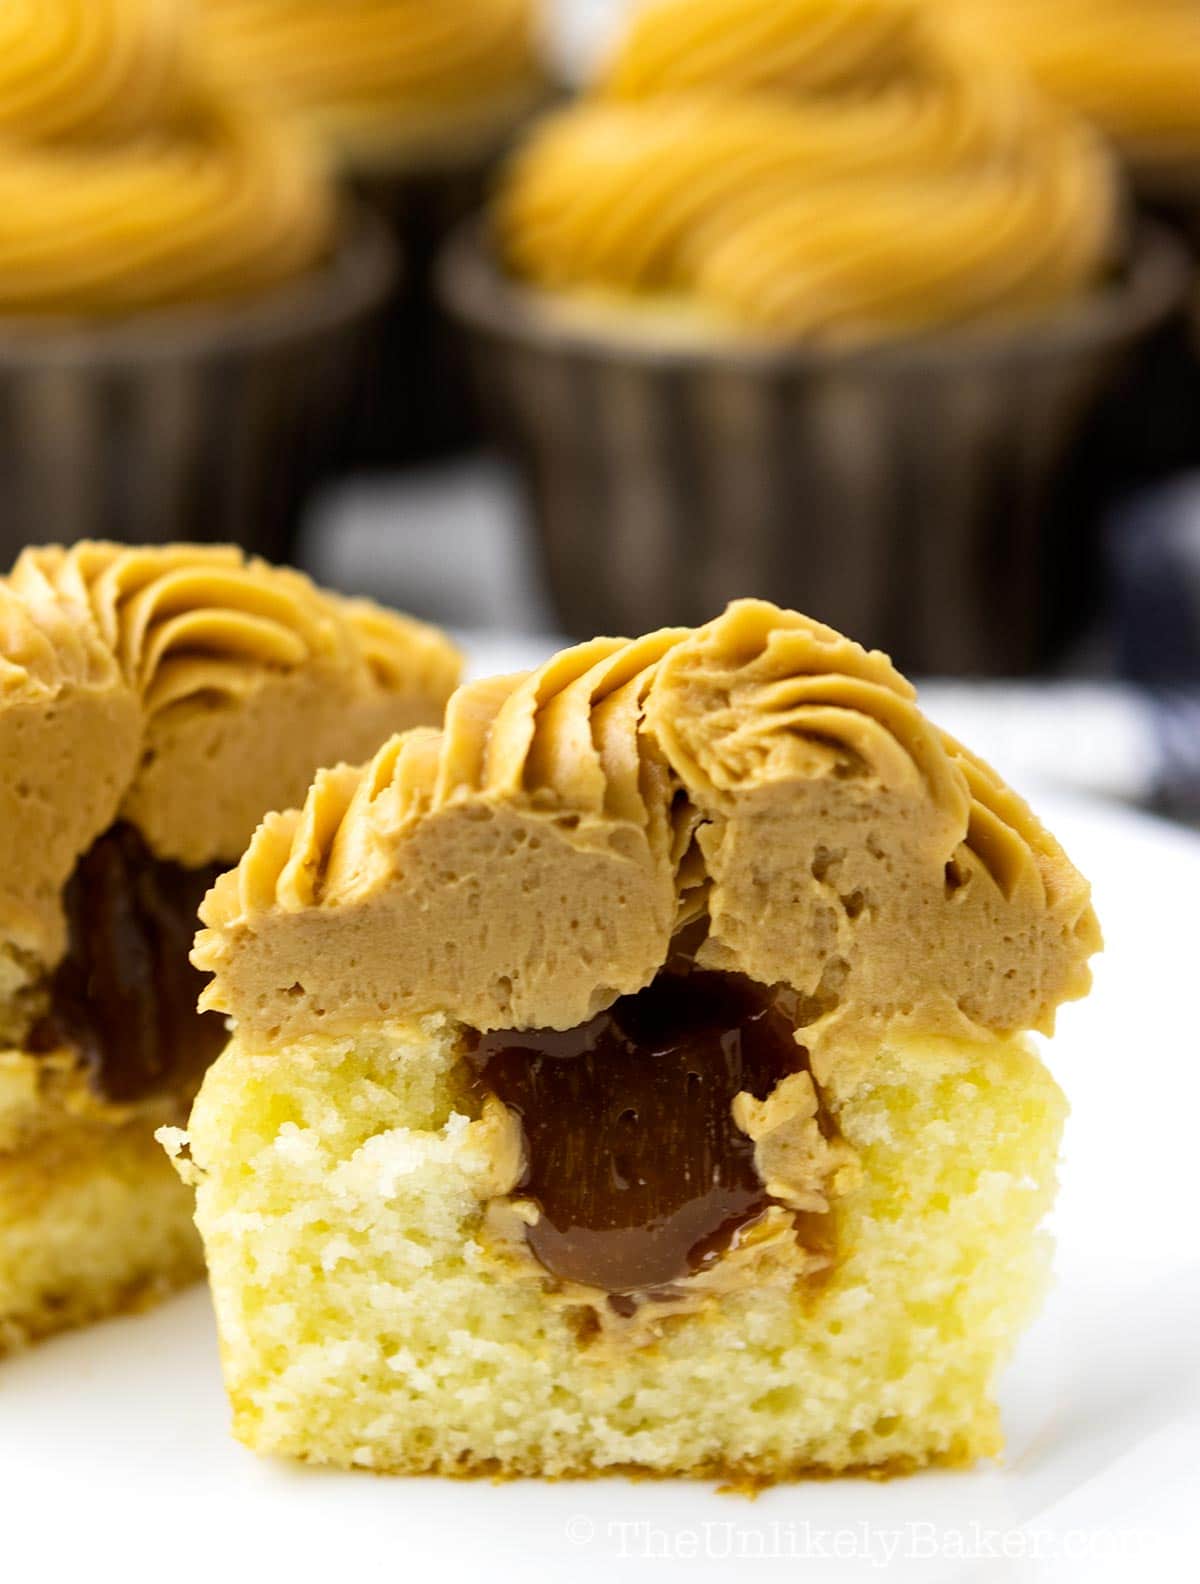 Dulce de leche filled cupcakes on a plate.